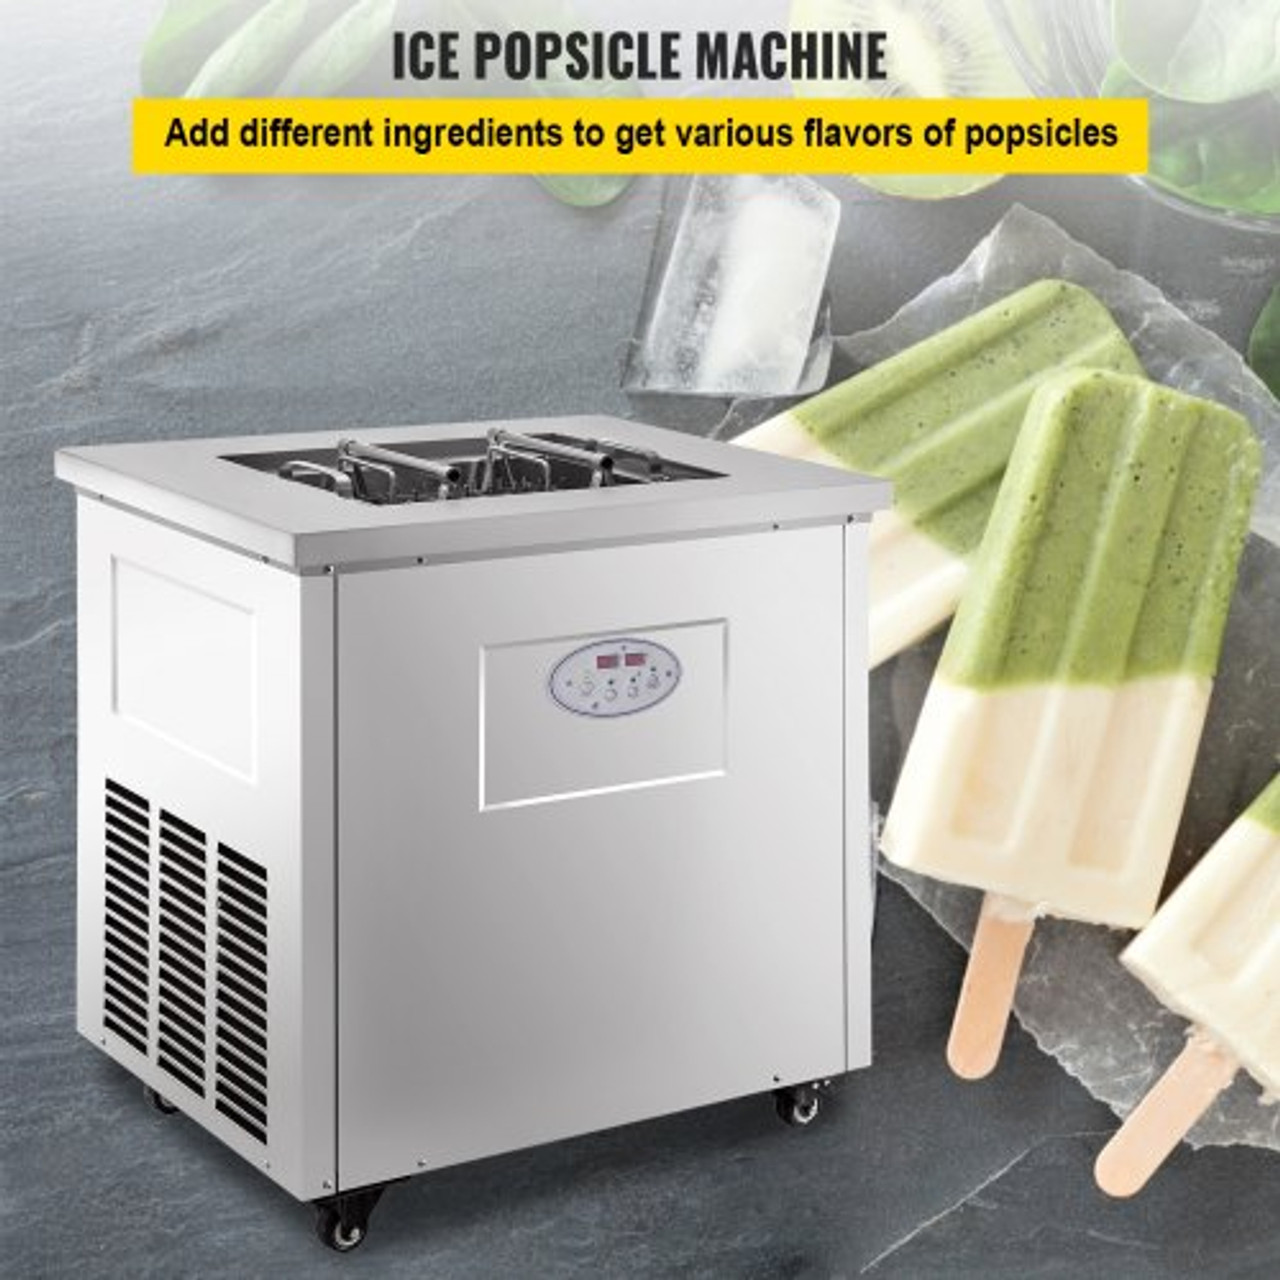  Commercial 4 Mold Sets Popsicle Machine, 30 Pcs Lollipop Set  Ice Lolly Machine Stainless Steel Ice Pop Maker, Ice Cream Pop Making  Machine for Bars, Cafes, Milktea Store, Snack Food Street